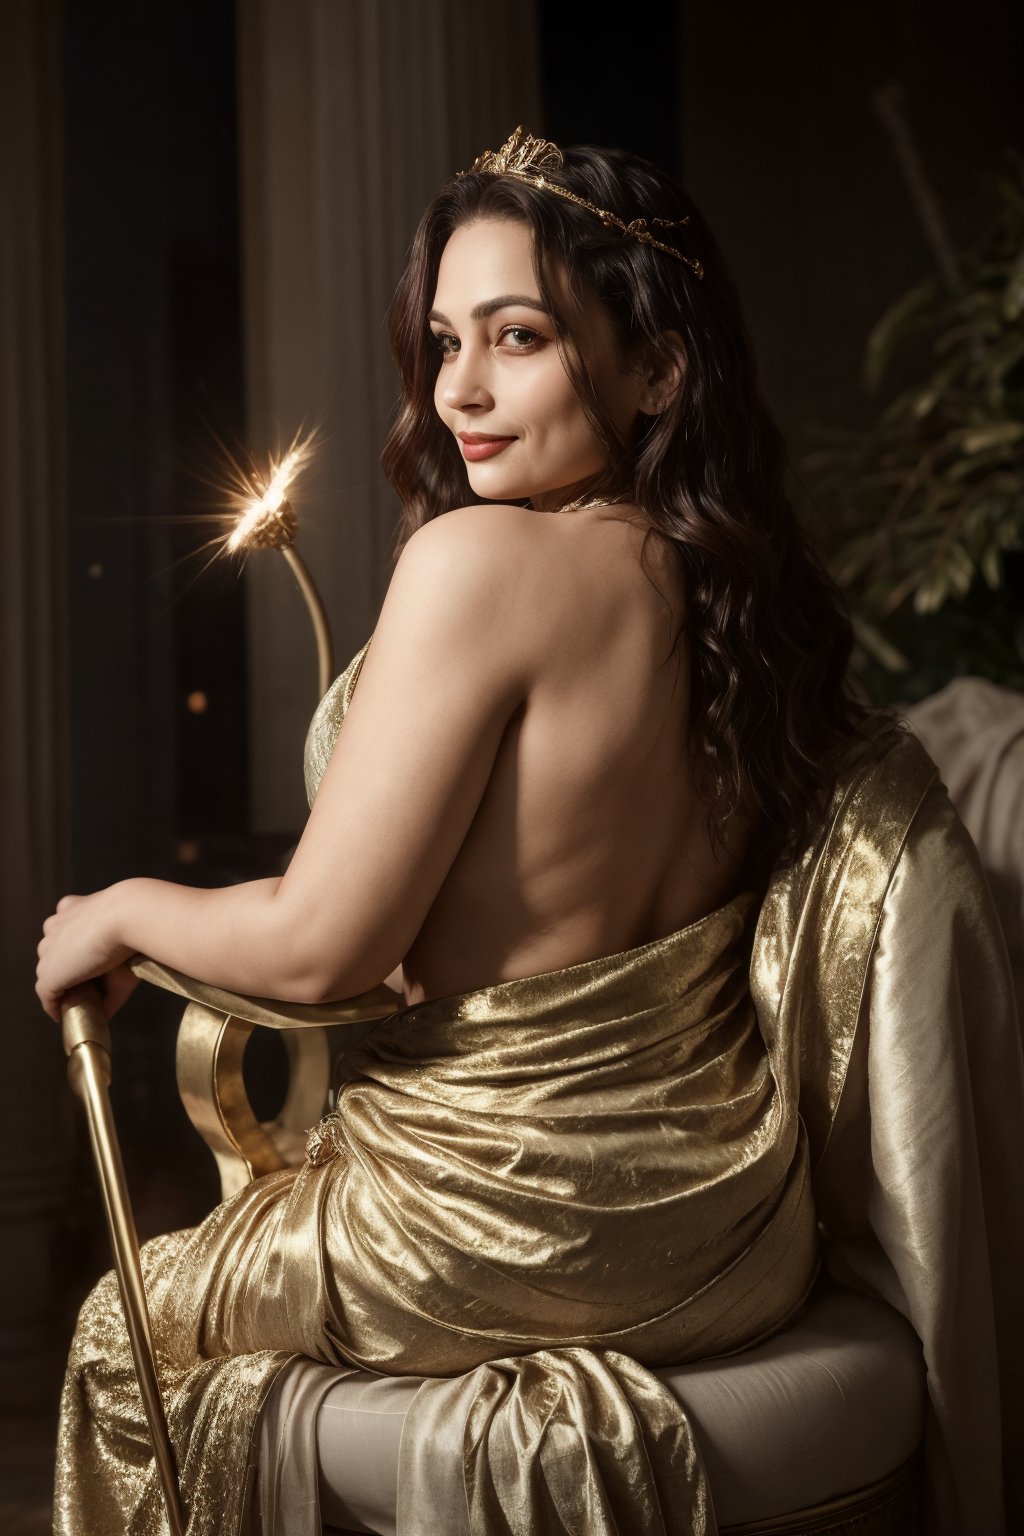 A sumptuous portrait of a 38-year-old woman with a robust figure, inspired by traditional mythological goddesses. She sits majestically on a velvet throne, adorned in flowing golden robes, her dark hair cascading down her back like a waterfall. Soft, warm lighting illuminates her plump features, accentuating her full lips and radiant smile. A gleaming golden tiara rests atop her curly locks, as she confidently holds a symbolic staff, exuding power and femininity.